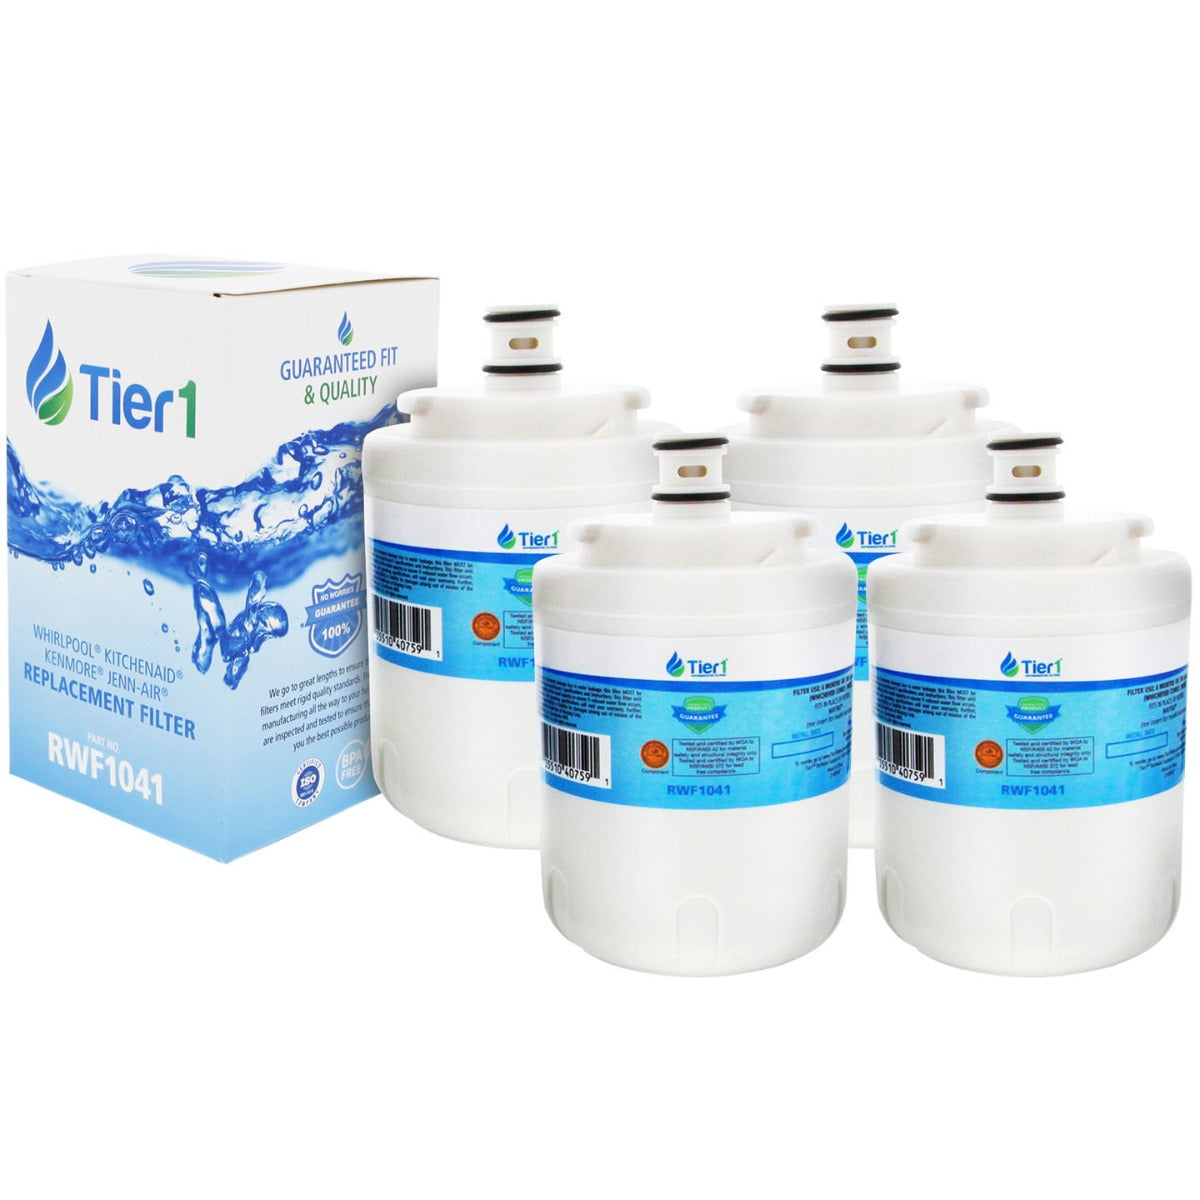 Tier1 EveryDrop EDR7D1 Maytag UKF7003 Refrigerator Water Filter Replacement Comparable